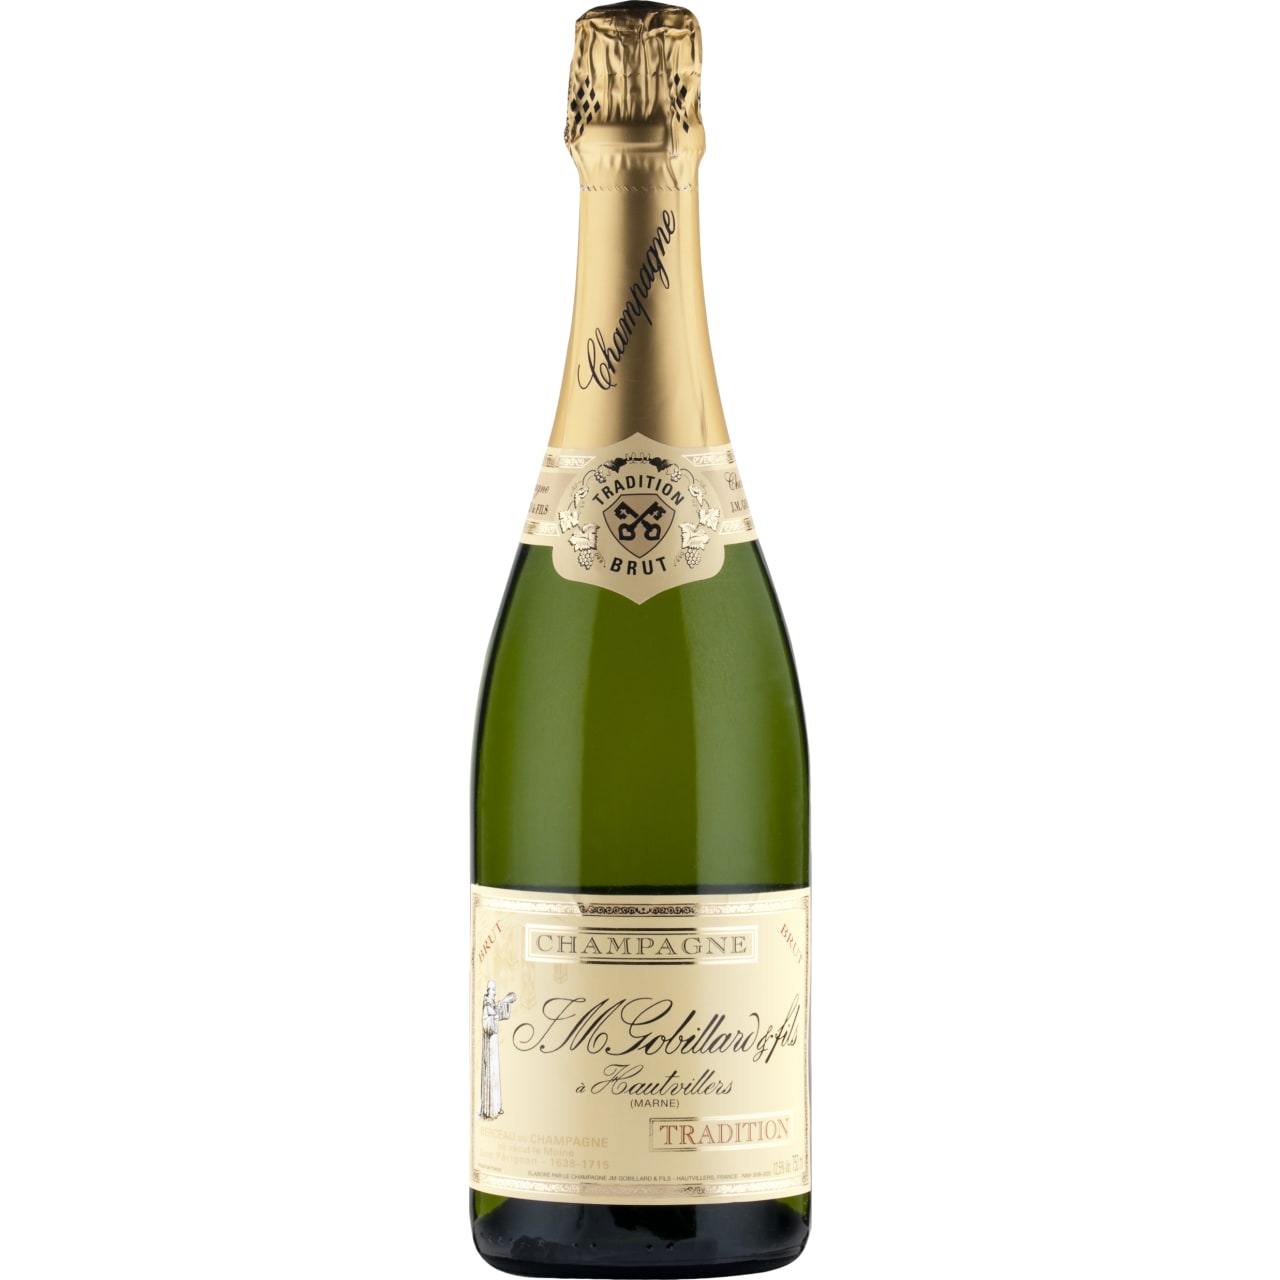 A gentle and elegant style with soft acidity and notes of ripe apple.